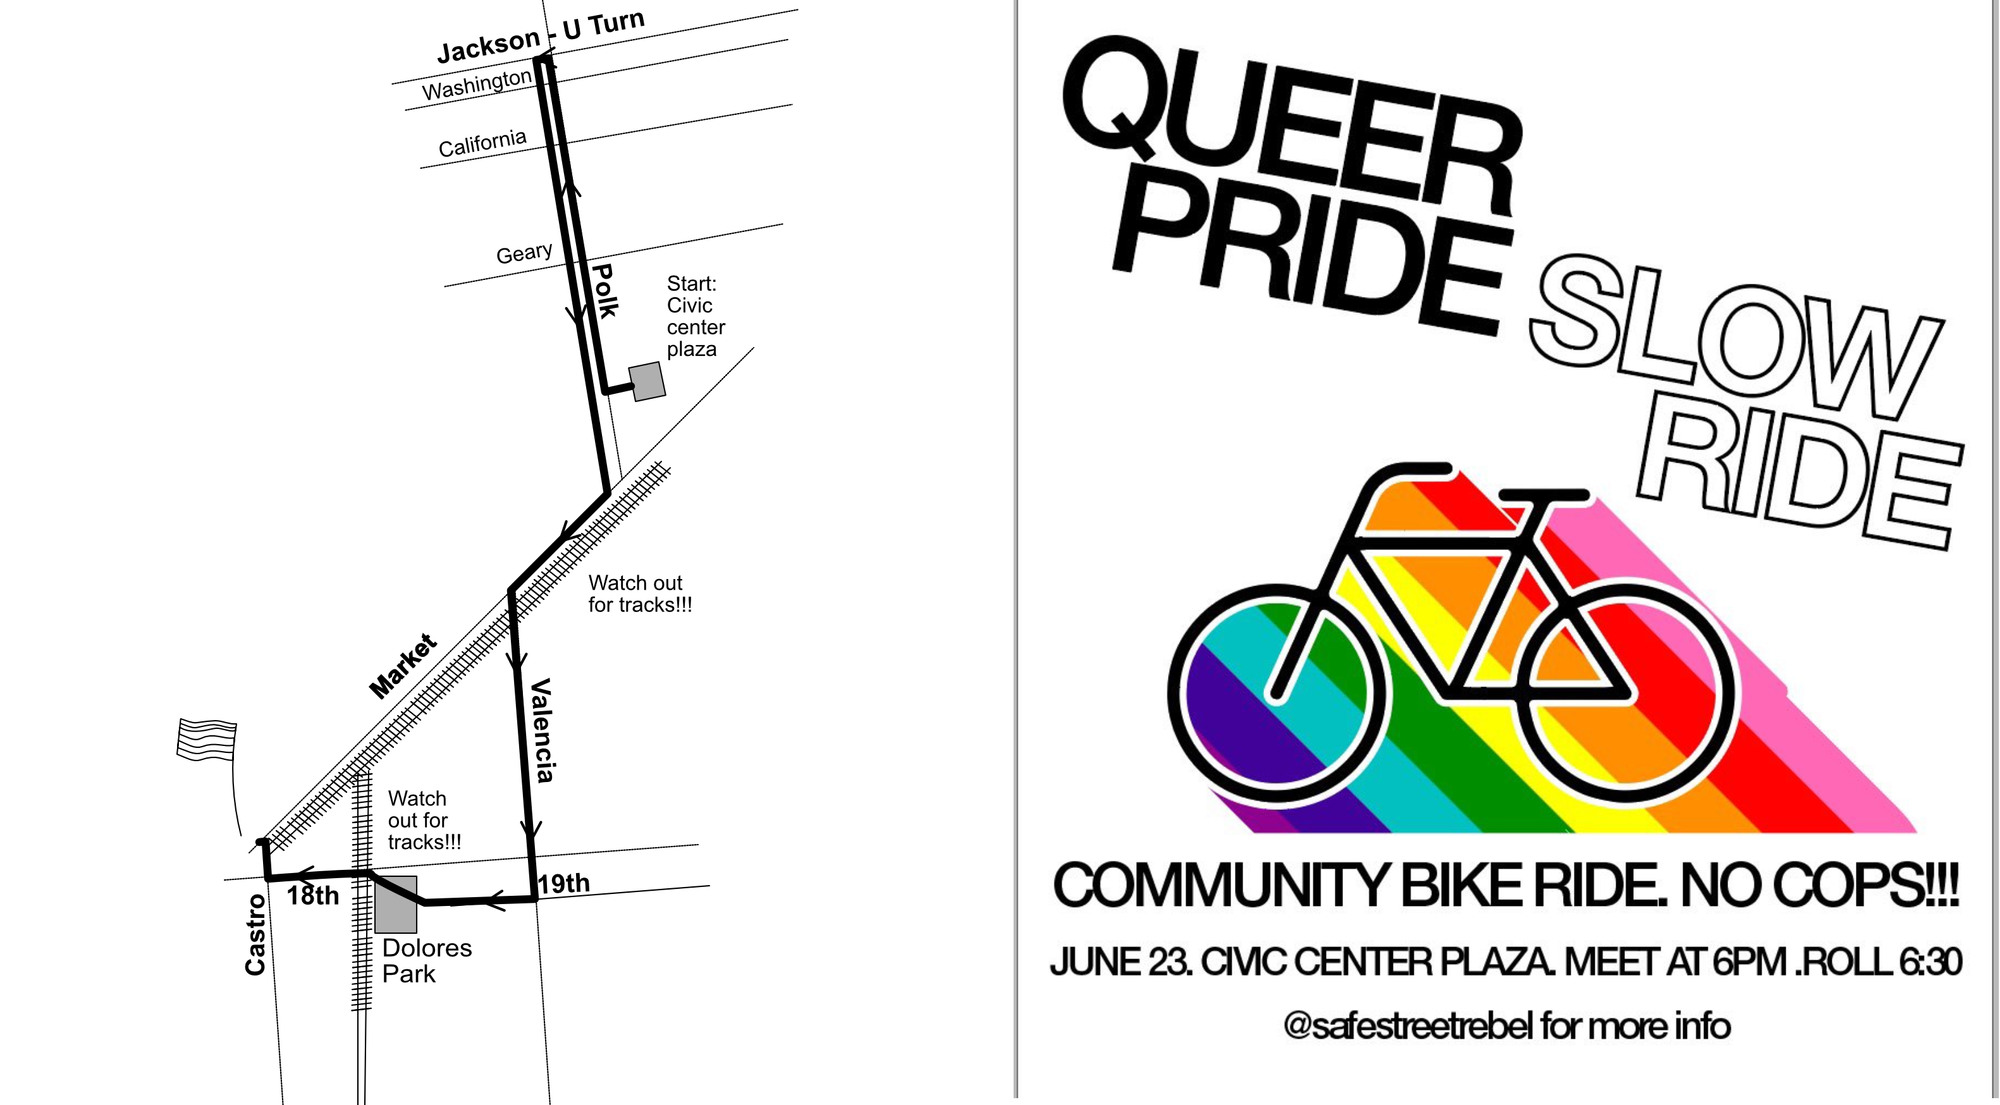 Two side by side images. The first shows a map of a route, starting at civic center plaza, going north on Polk until Jackson, then turning back, going to market, down Valencia to 19th, across Dolores park and finishing at the flag in the castro. The second is a flyeaying “Queer Pride Slow Ride” with a drawing of a bicycle over a rainbow. Text below says “Community bike ride. No cops!!! June 23. Civic Center Plaza. Meet at 6 PM. Roll 6:30. @safestreetrebel for more info”r 